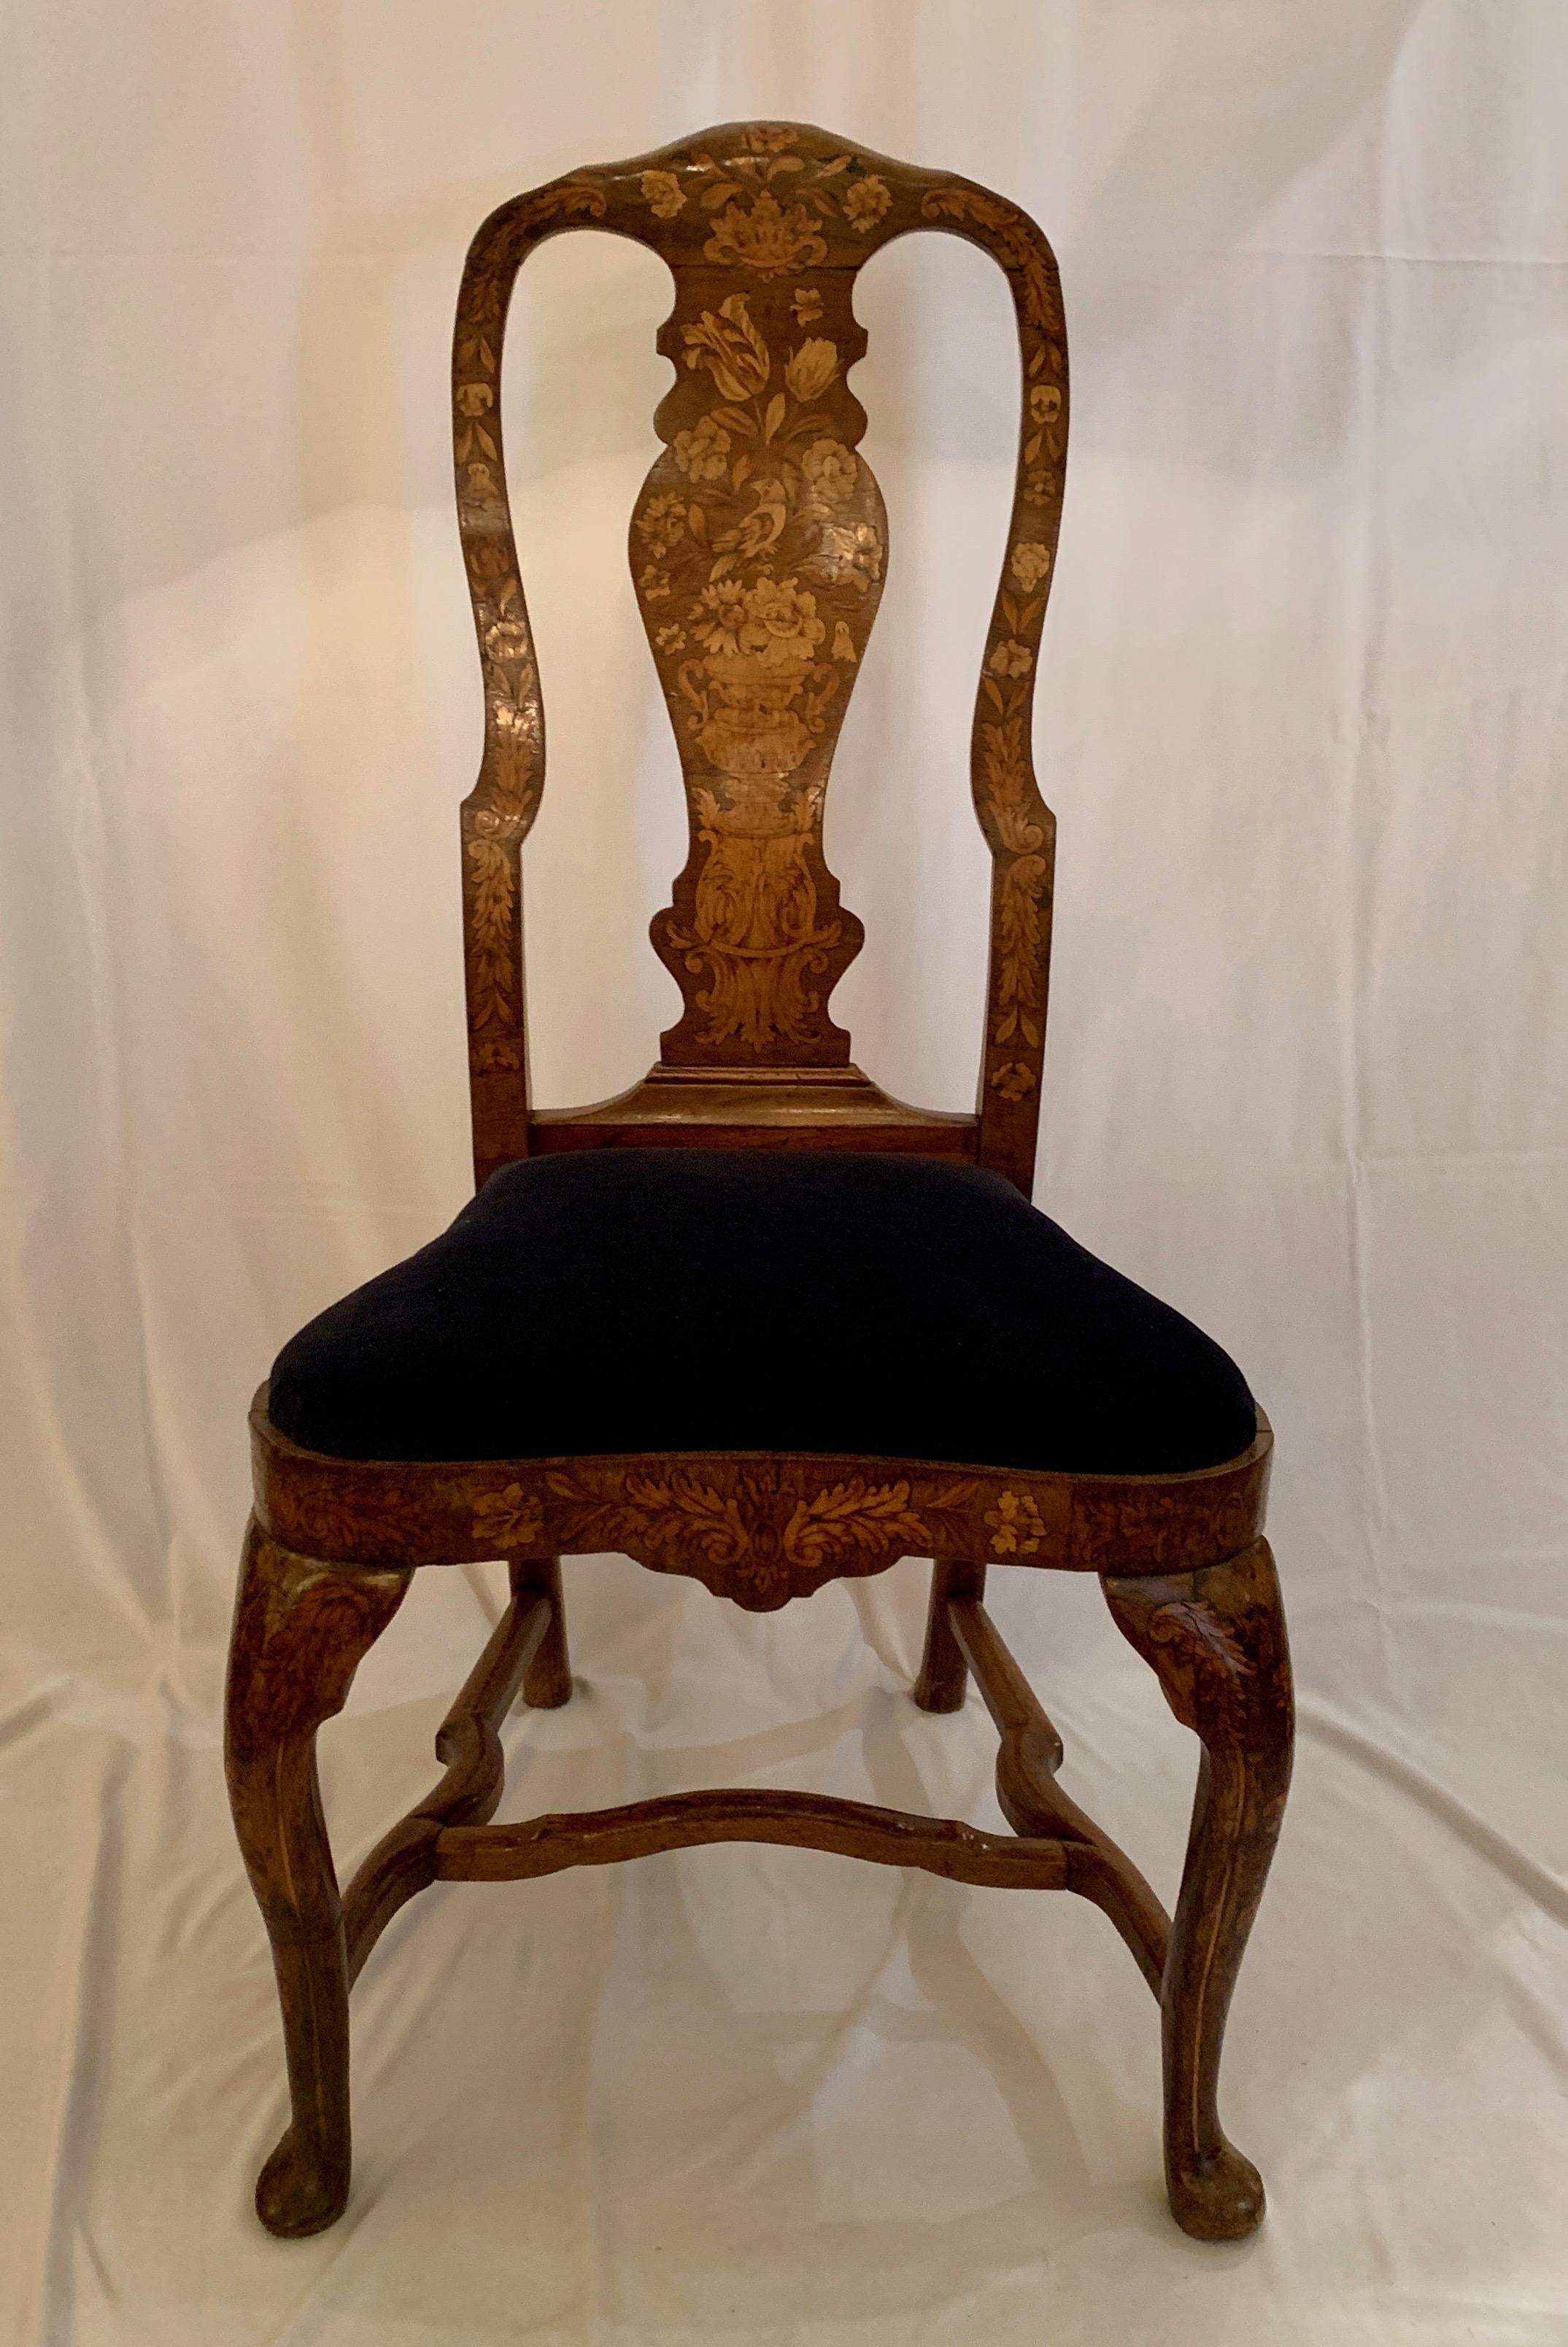 Pair Antique Queen Anne Style Dutch Marquetry Walnut Chairs, Circa 1810-1820.
These beautiful, and old, Dutch marquetry chairs appeal to collectors and fanciers of marquetry and handsome design in equal measure.

          